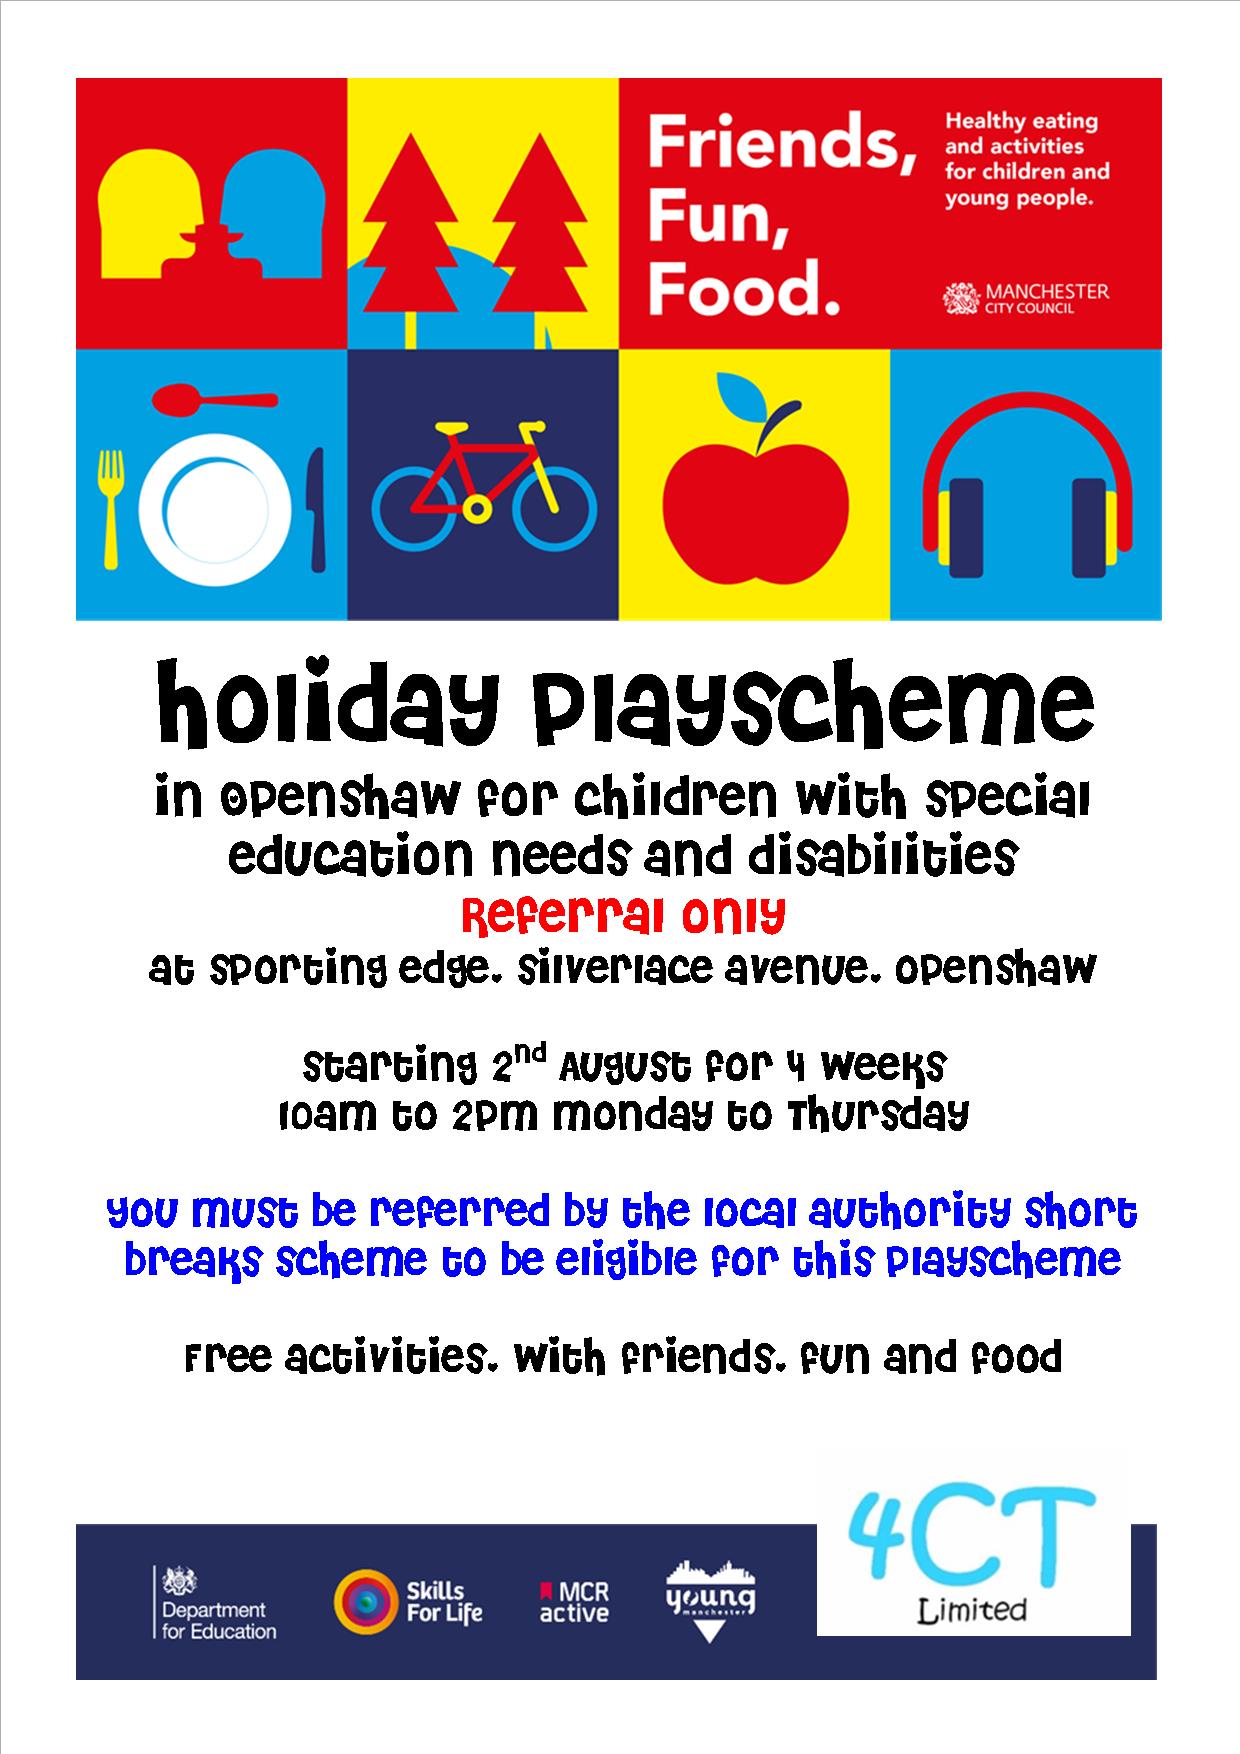 Playscheme for children with  special education needs and disabilities